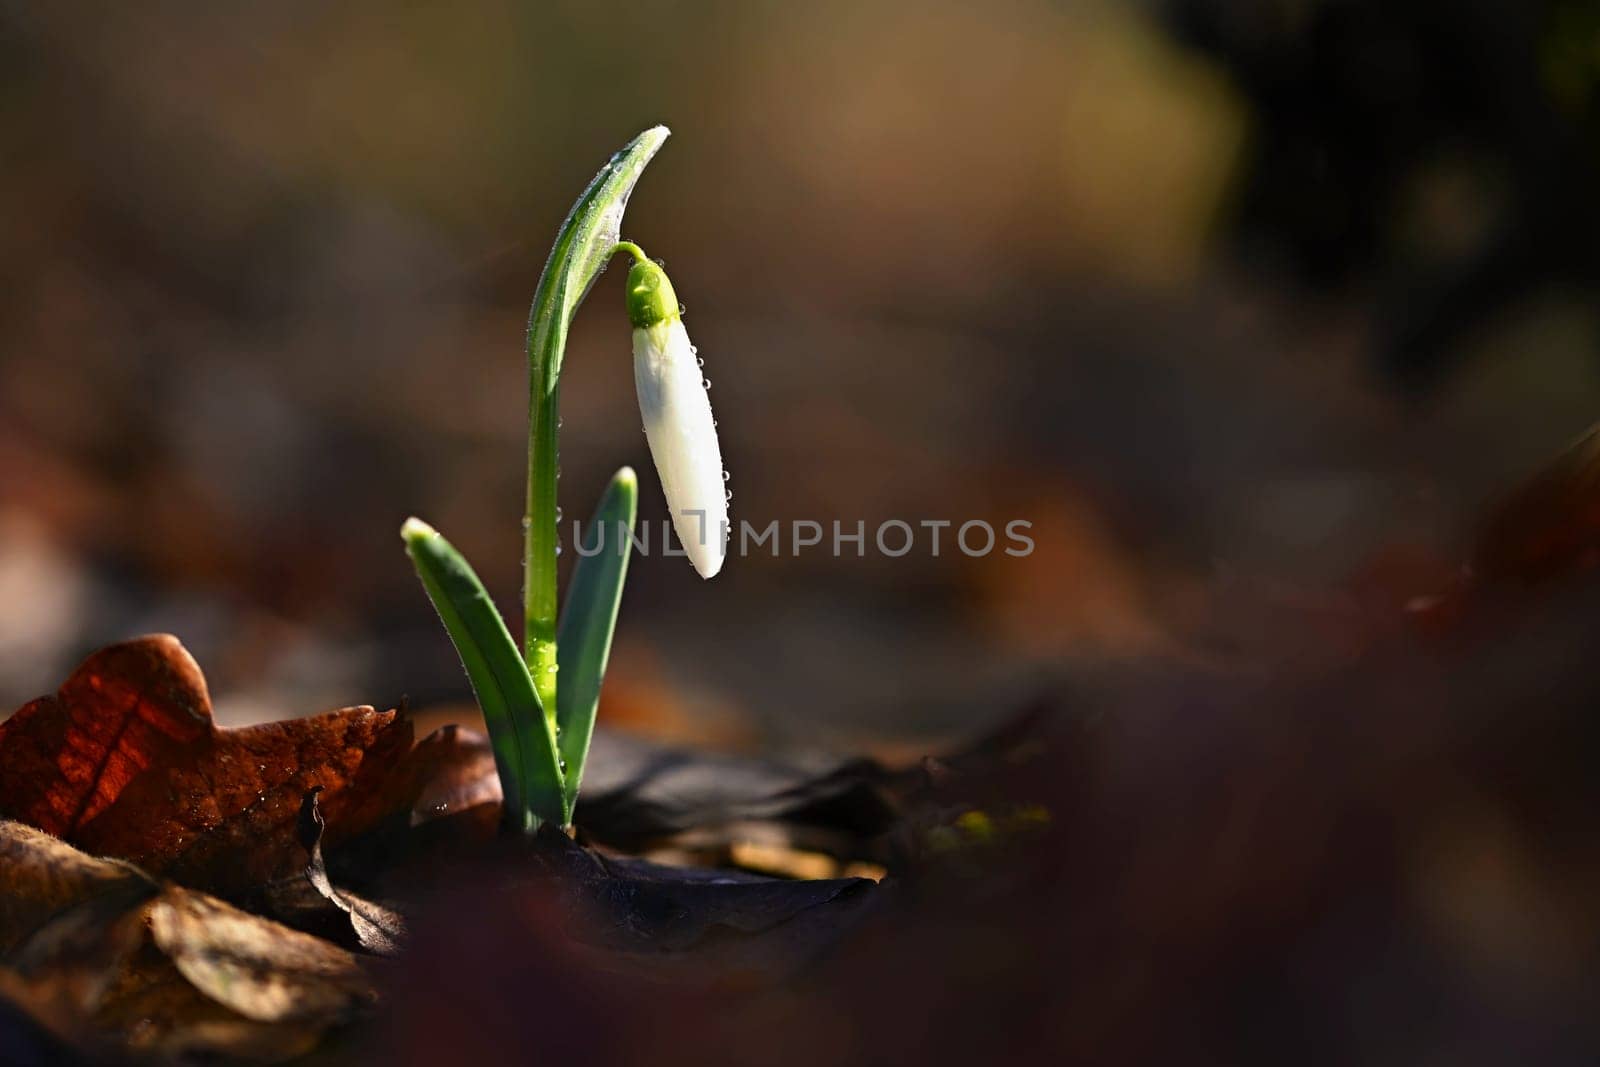 Snowdrops spring flowers. Beautifully blooming in the grass at sunset. Delicate Snowdrop flower is one of the spring symbols. (Amaryllidaceae - Galanthus nivalis)